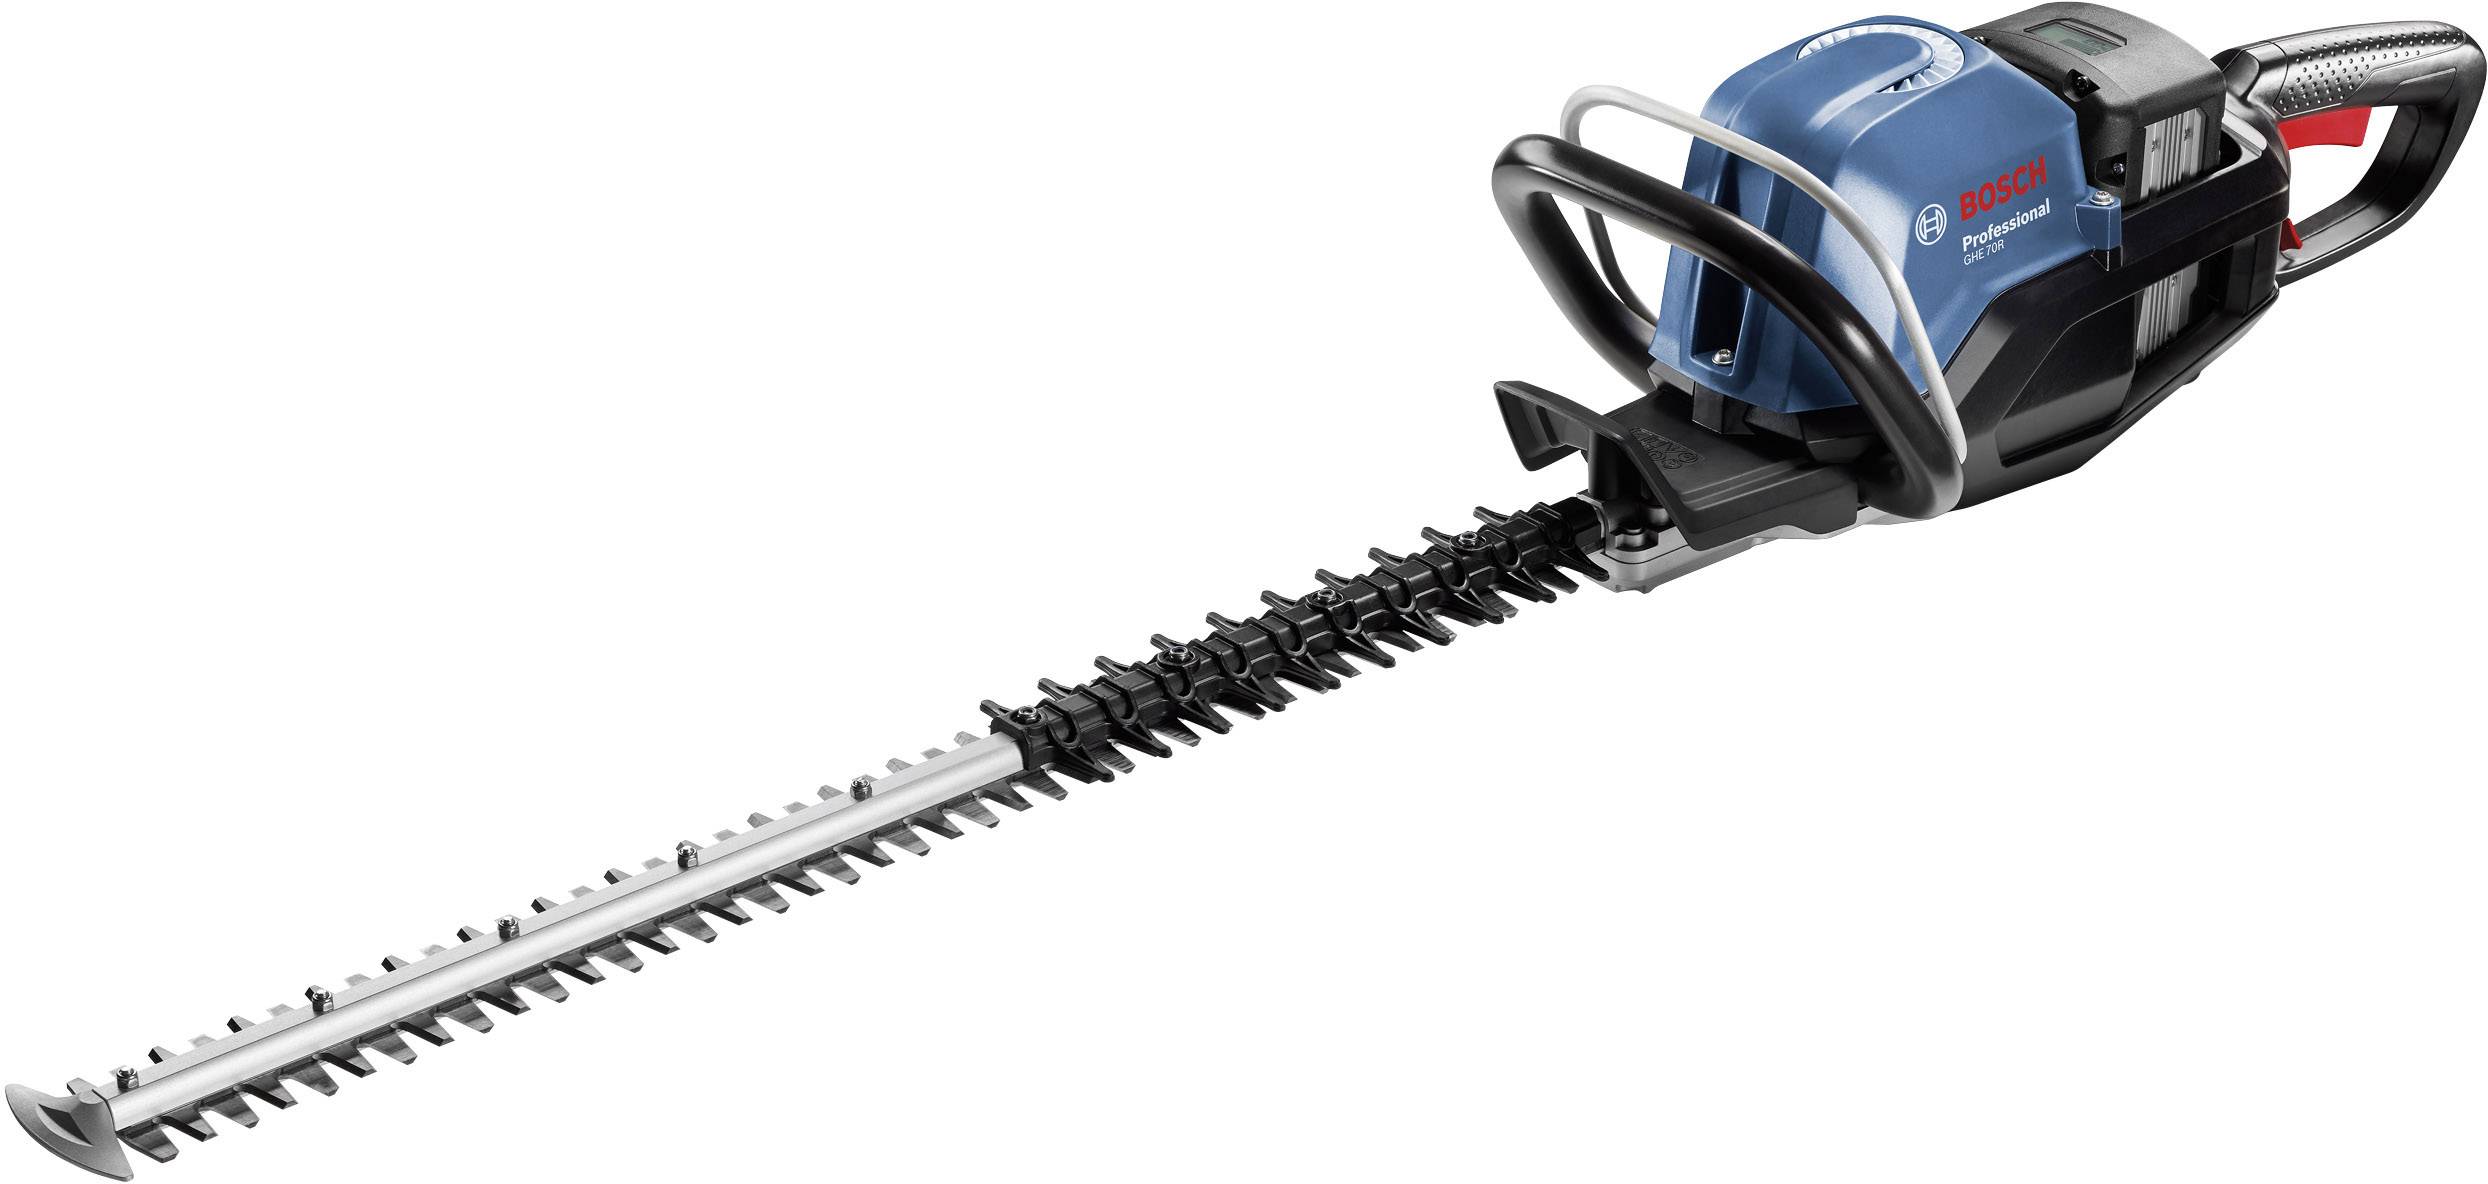 professional cordless hedge trimmer